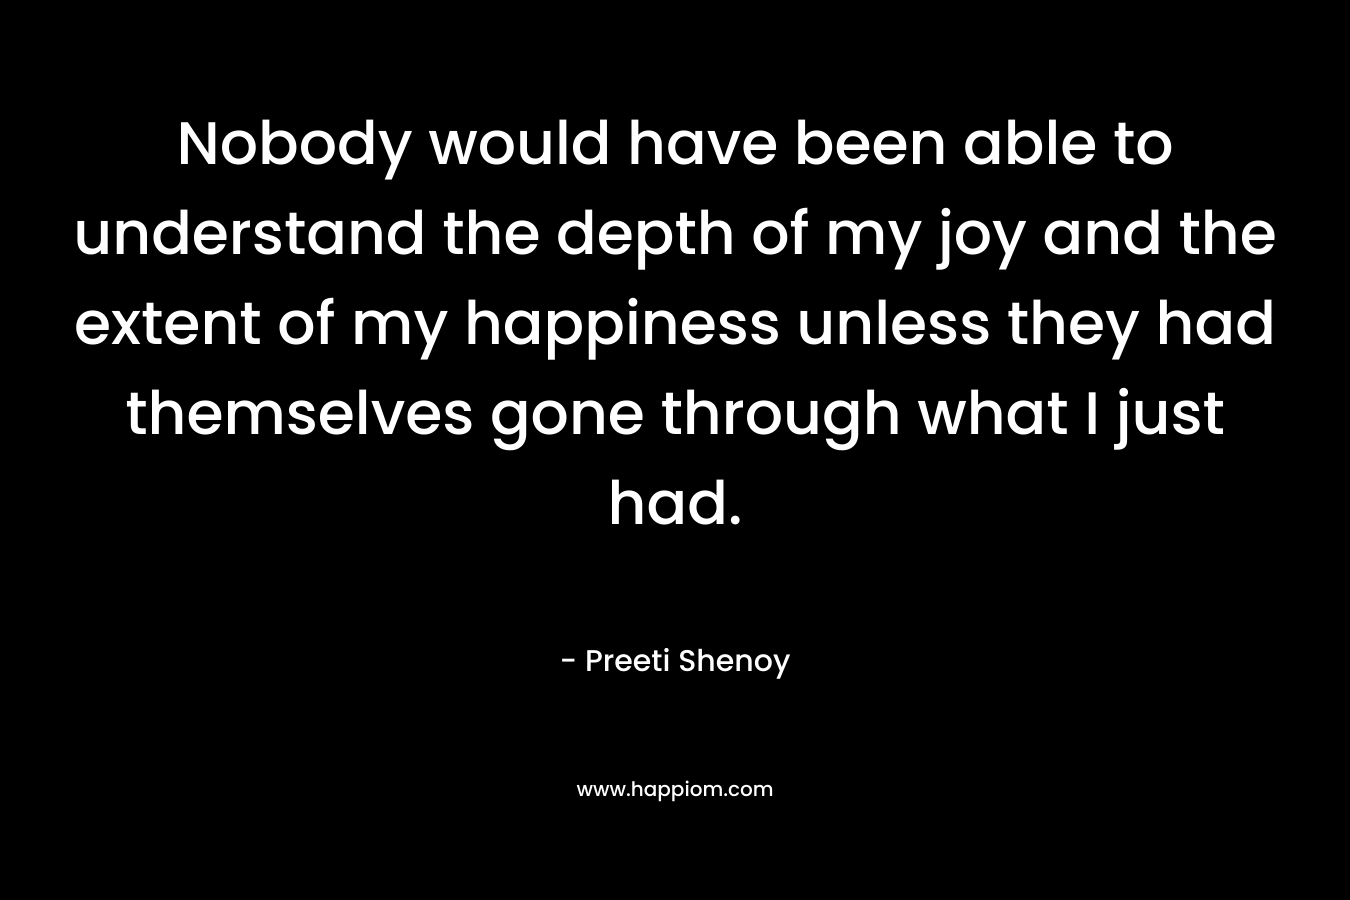 Nobody would have been able to understand the depth of my joy and the extent of my happiness unless they had themselves gone through what I just had. – Preeti Shenoy